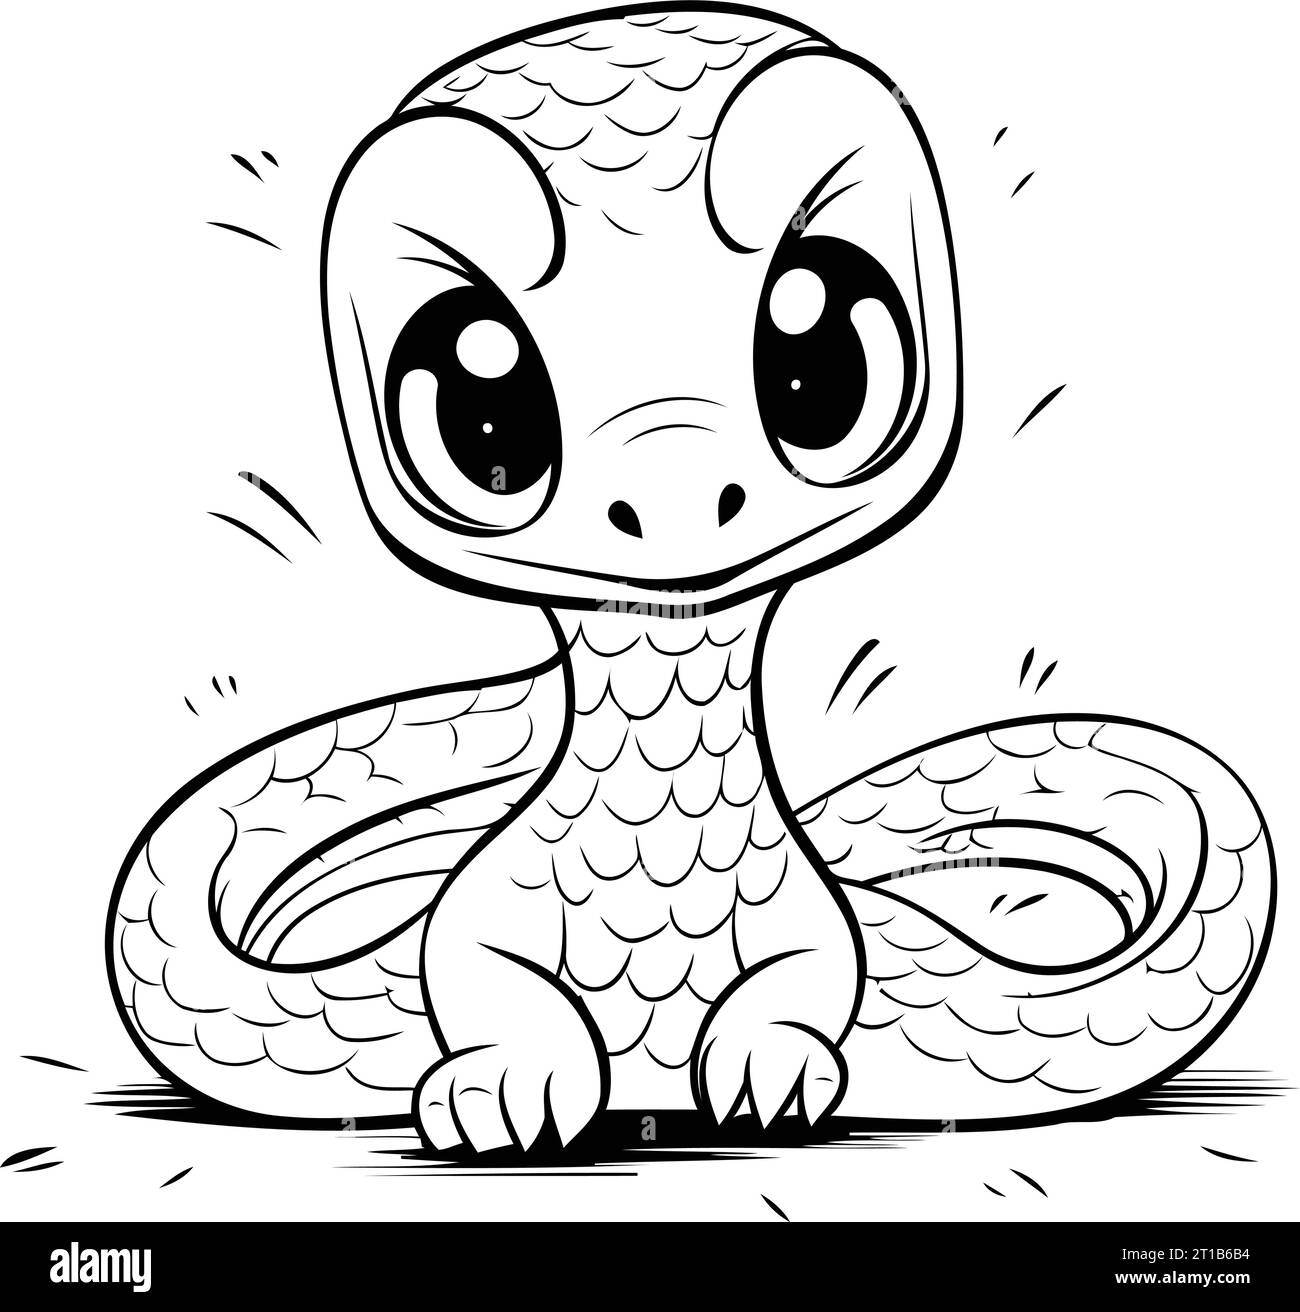 Cute cartoon snake. Black and white vector illustration for coloring book. Stock Vector